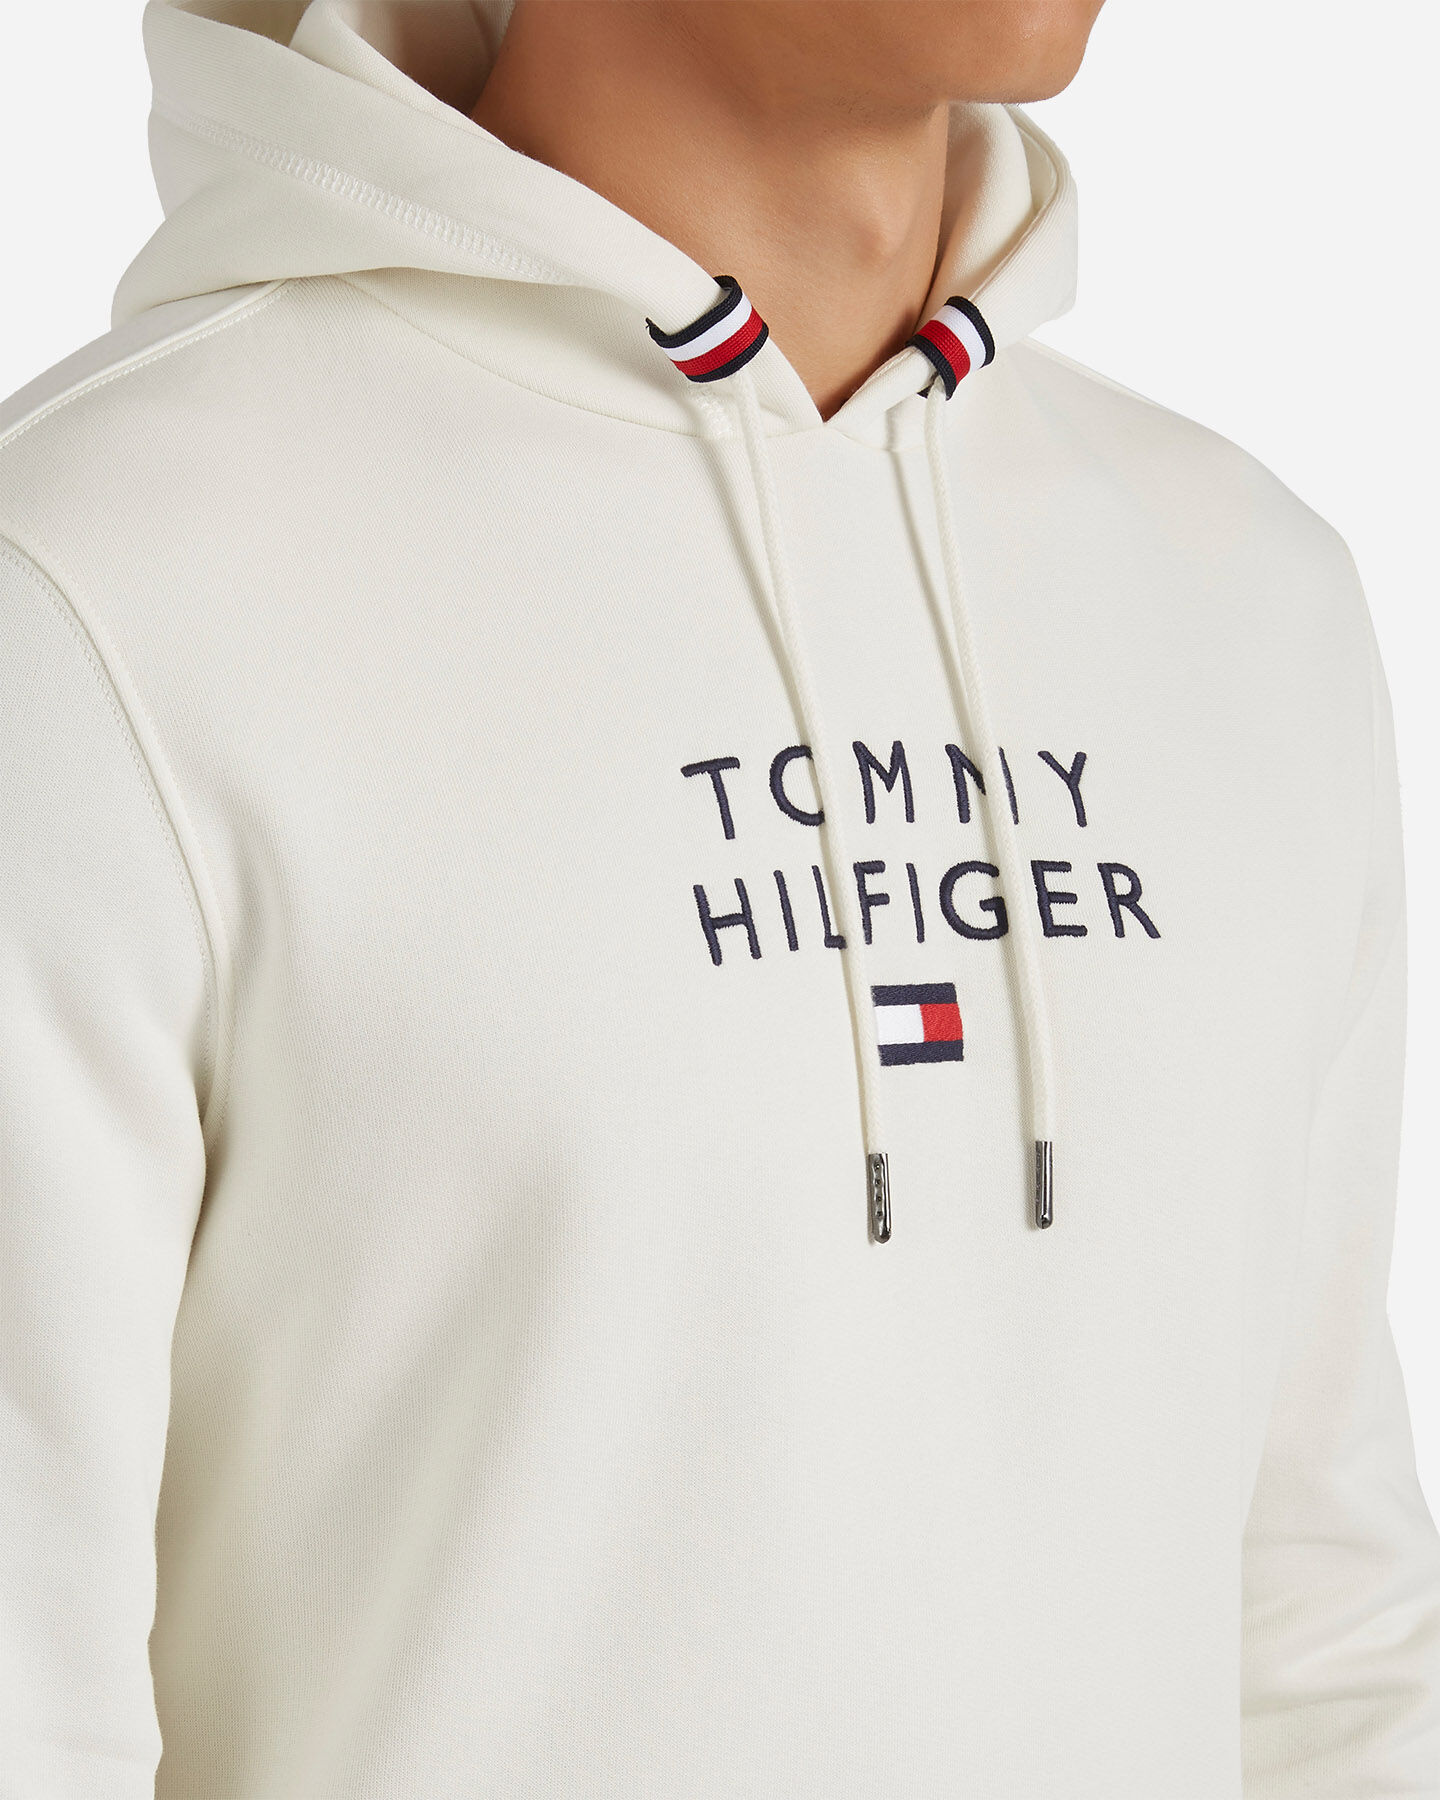  Felpa TOMMY HILFIGER STACKED FLAG M S4092893|YBI|S scatto 4